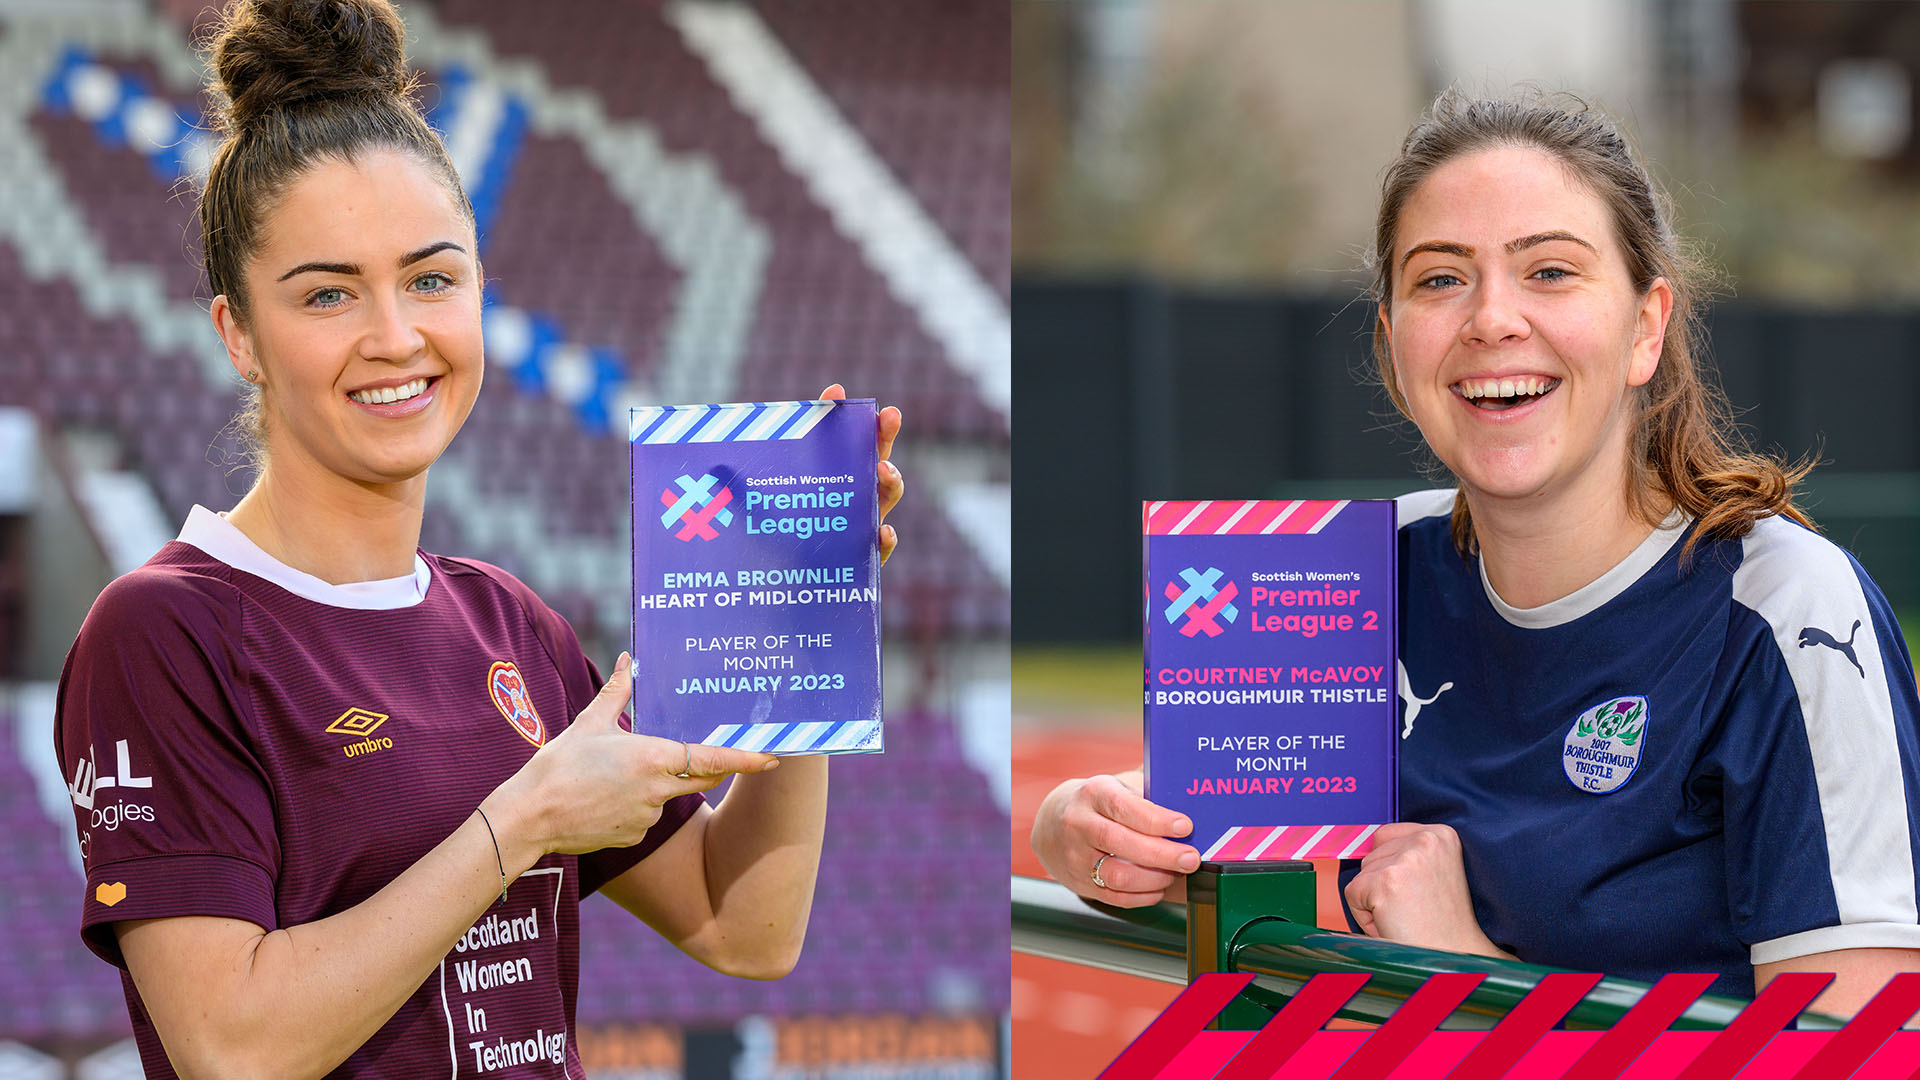 Brownlie and McAvoy make it an Edinburgh double for Hearts and Boroughmuir Thistle respectively